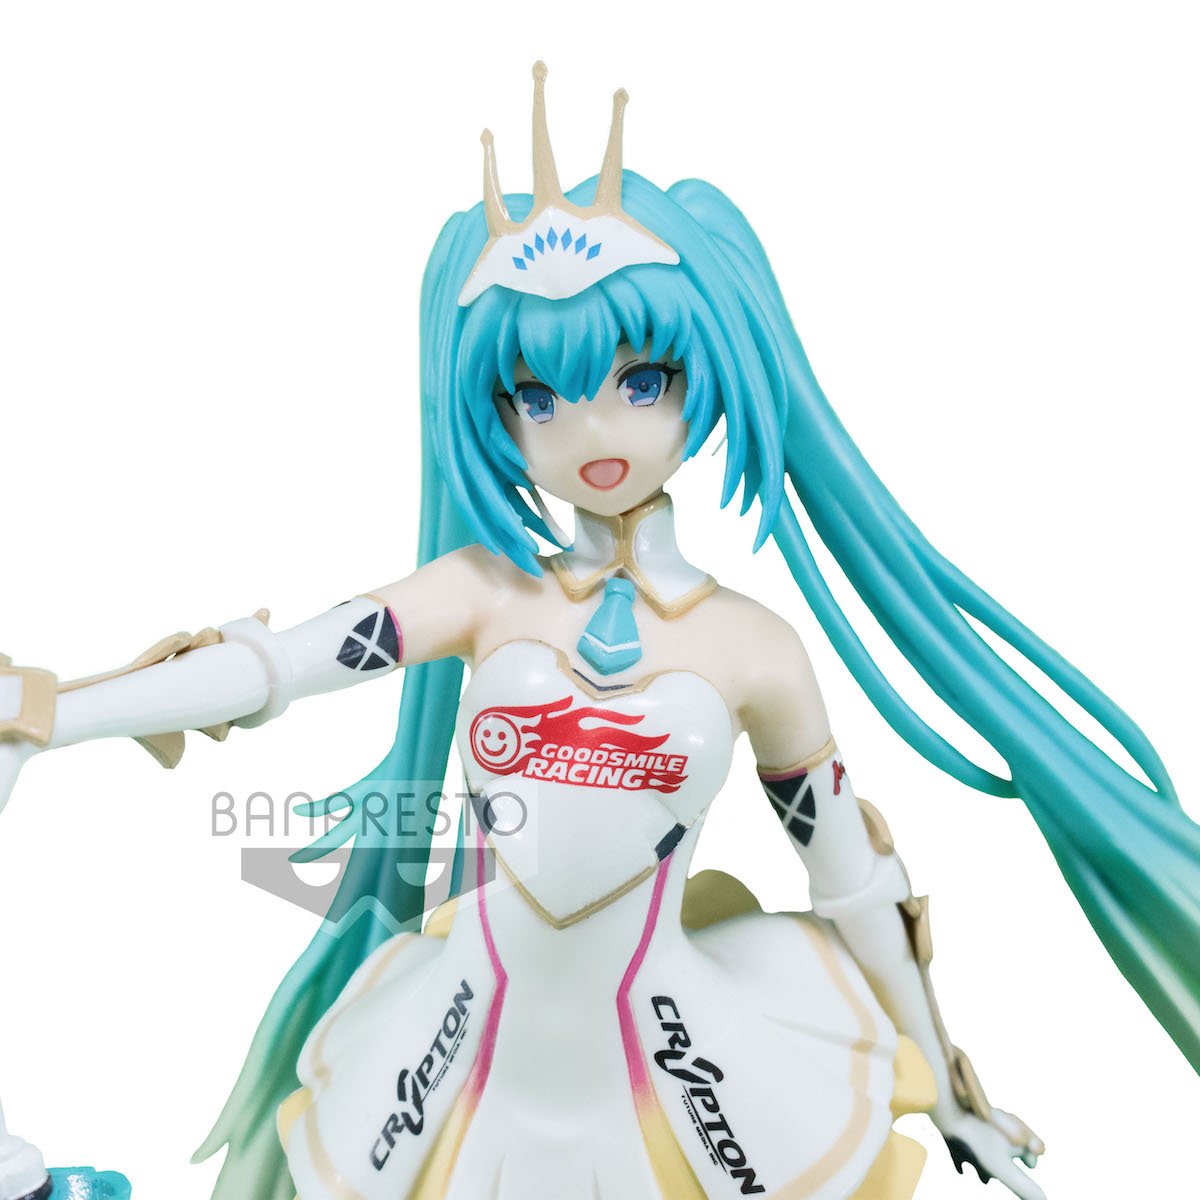 Details about   New Figma Racing Miku 2015 TeamUKYO Cheering ver Action Figure from Japan F/S 